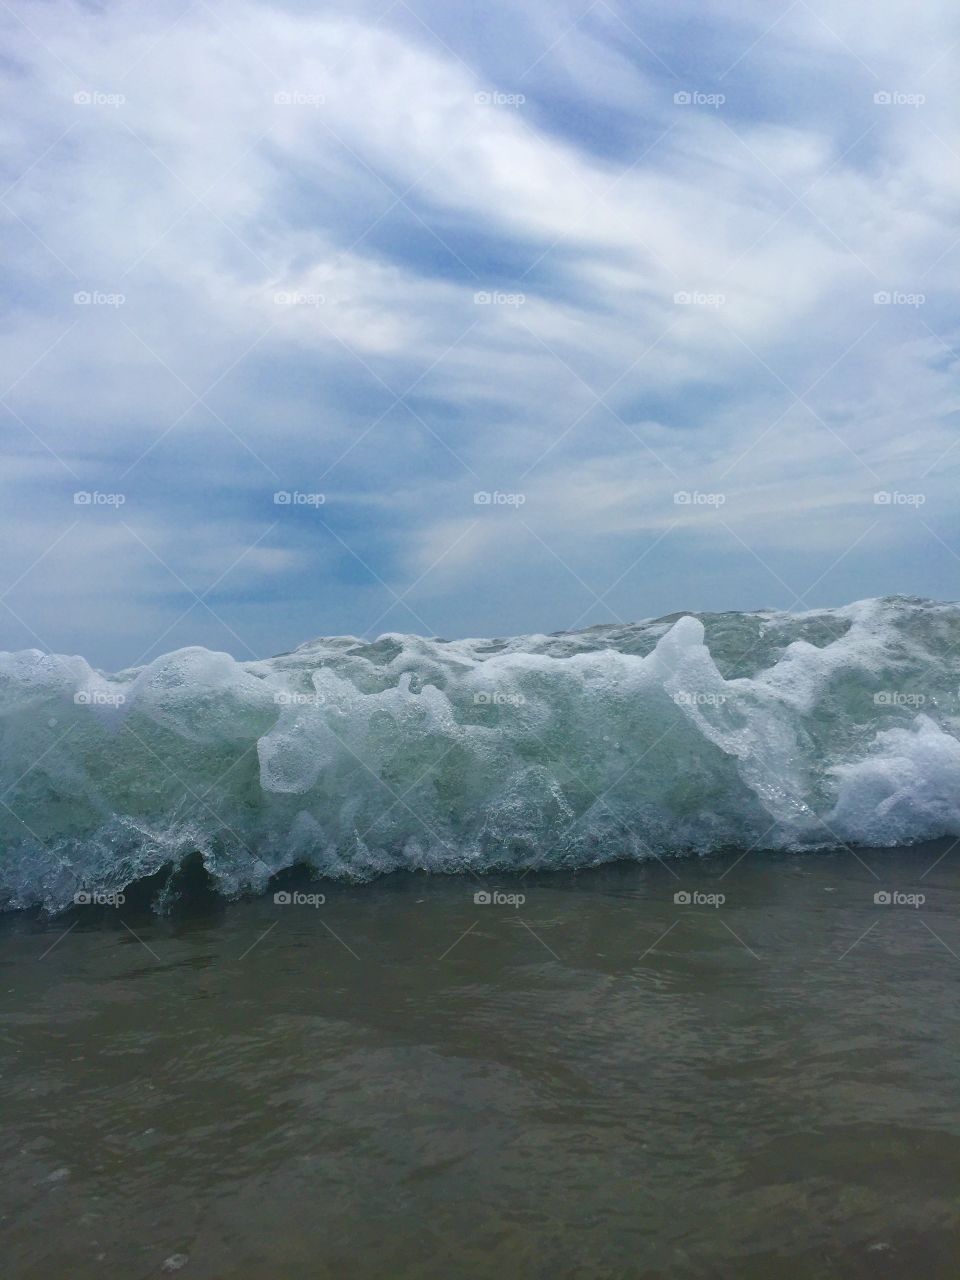 In the middle of a wave . Wave crashing down 